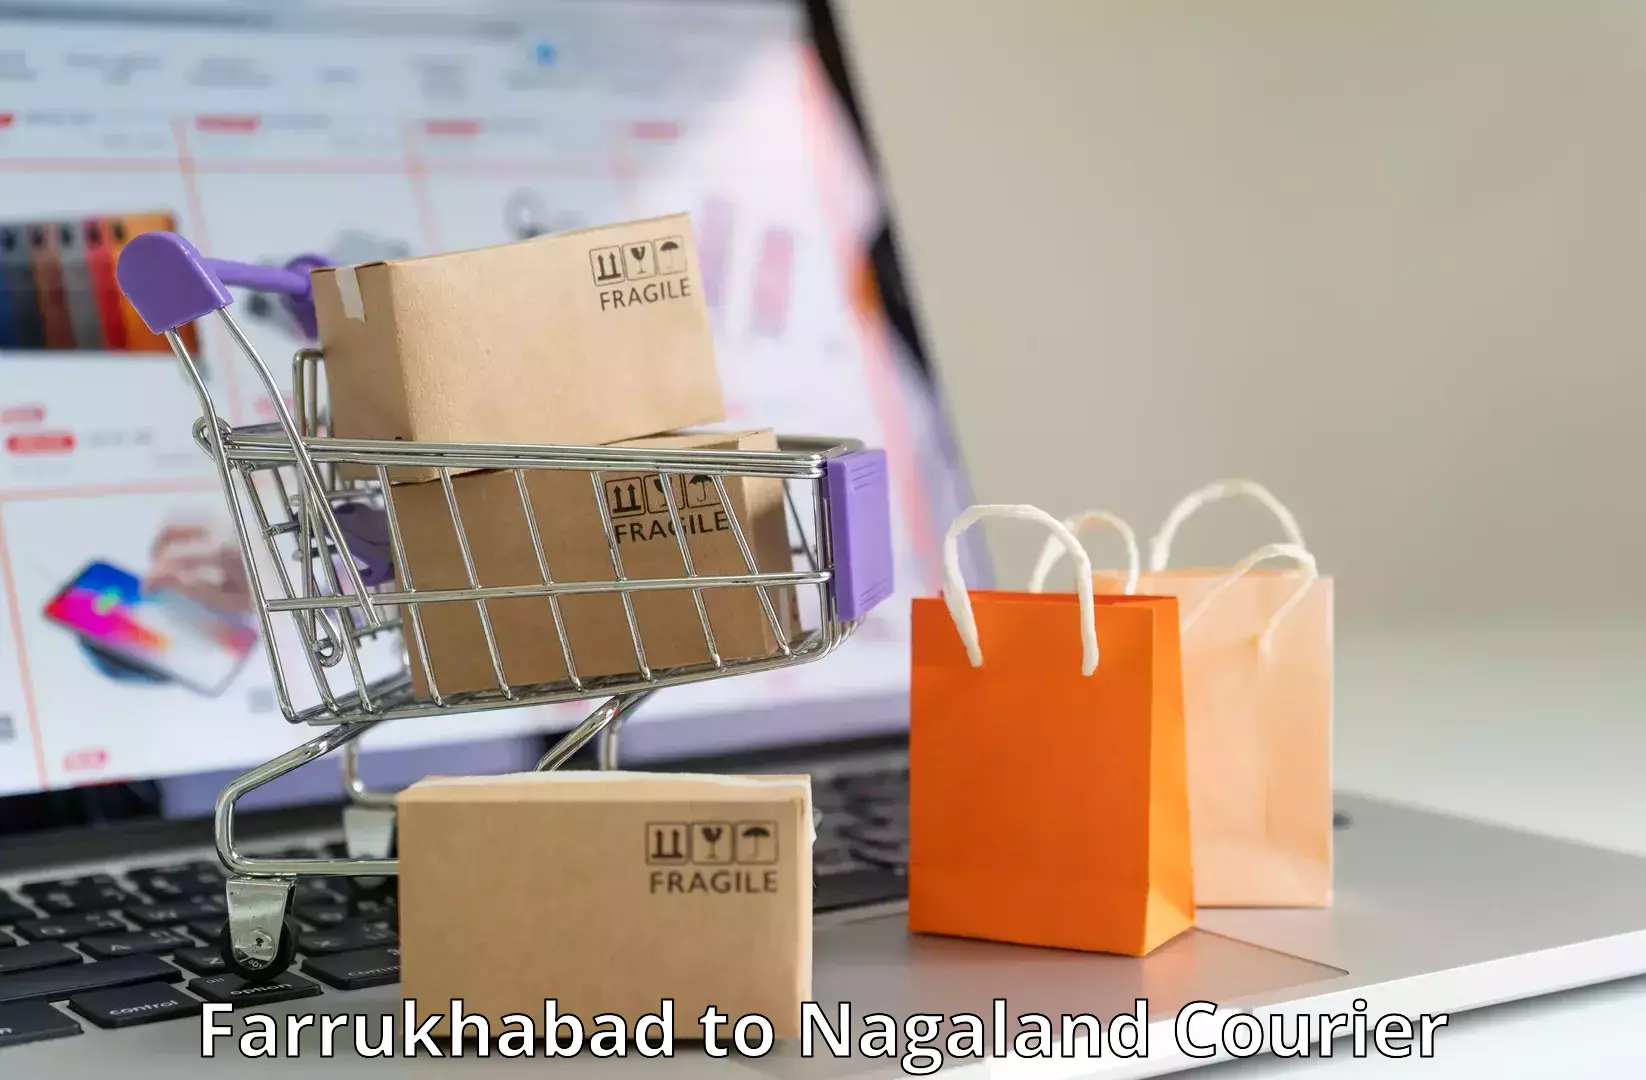 Customer-centric shipping in Farrukhabad to NIT Nagaland